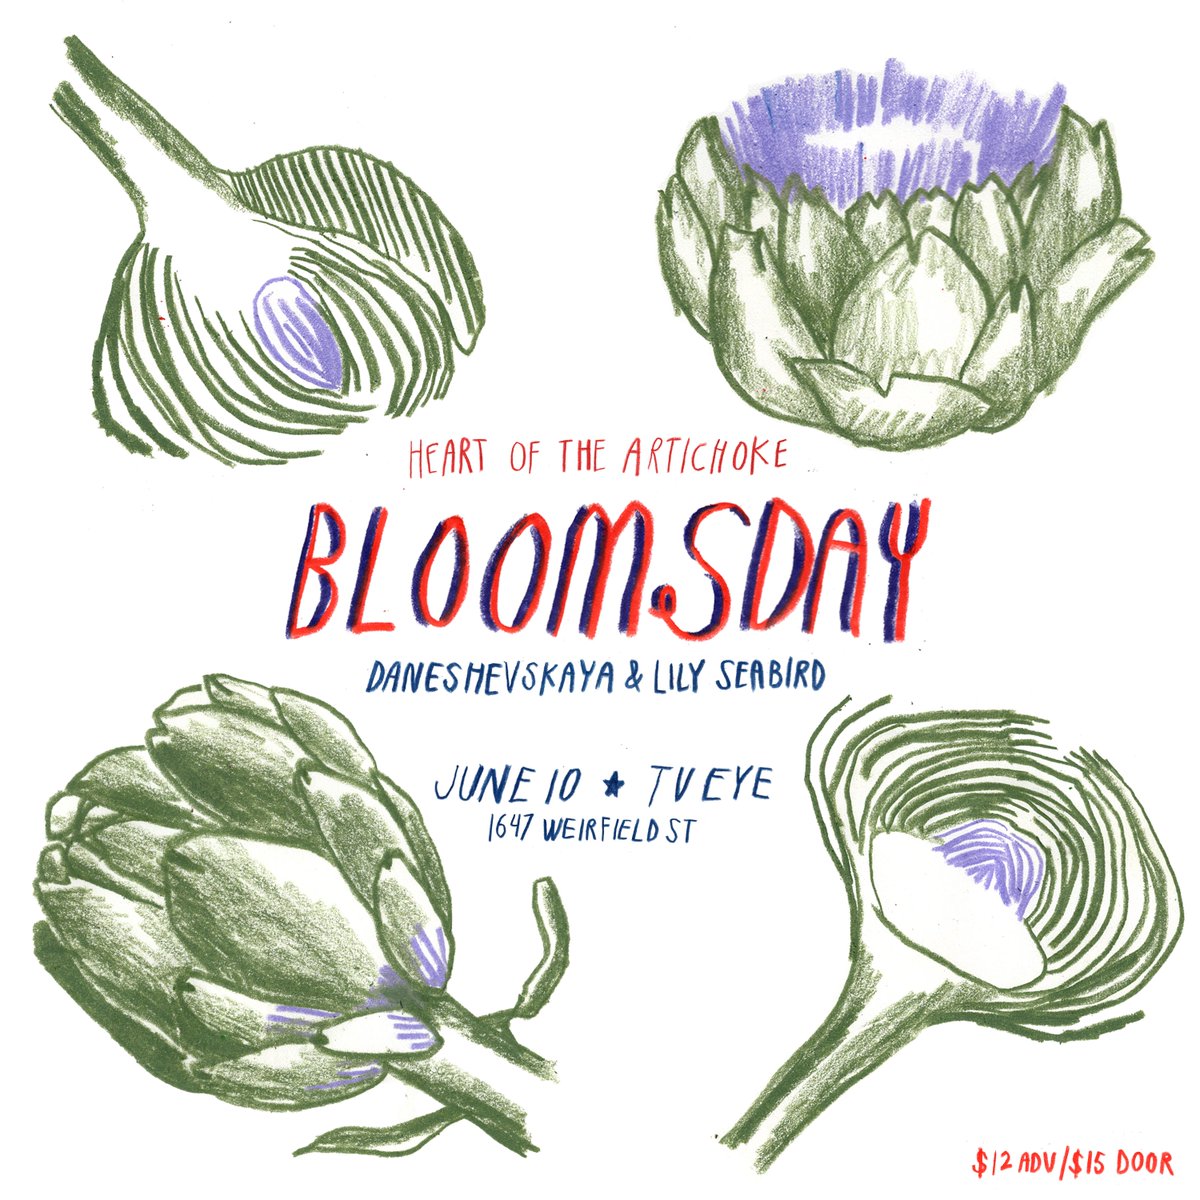 ❤️‍🔥WE'VE GOT AN ALBUM RELEASE SHOW❤️‍🔥 Come see @bl00msday play their full record + performances from Daneshevskaya & Lily Seabird wl.seetickets.us/event/bloomsda…